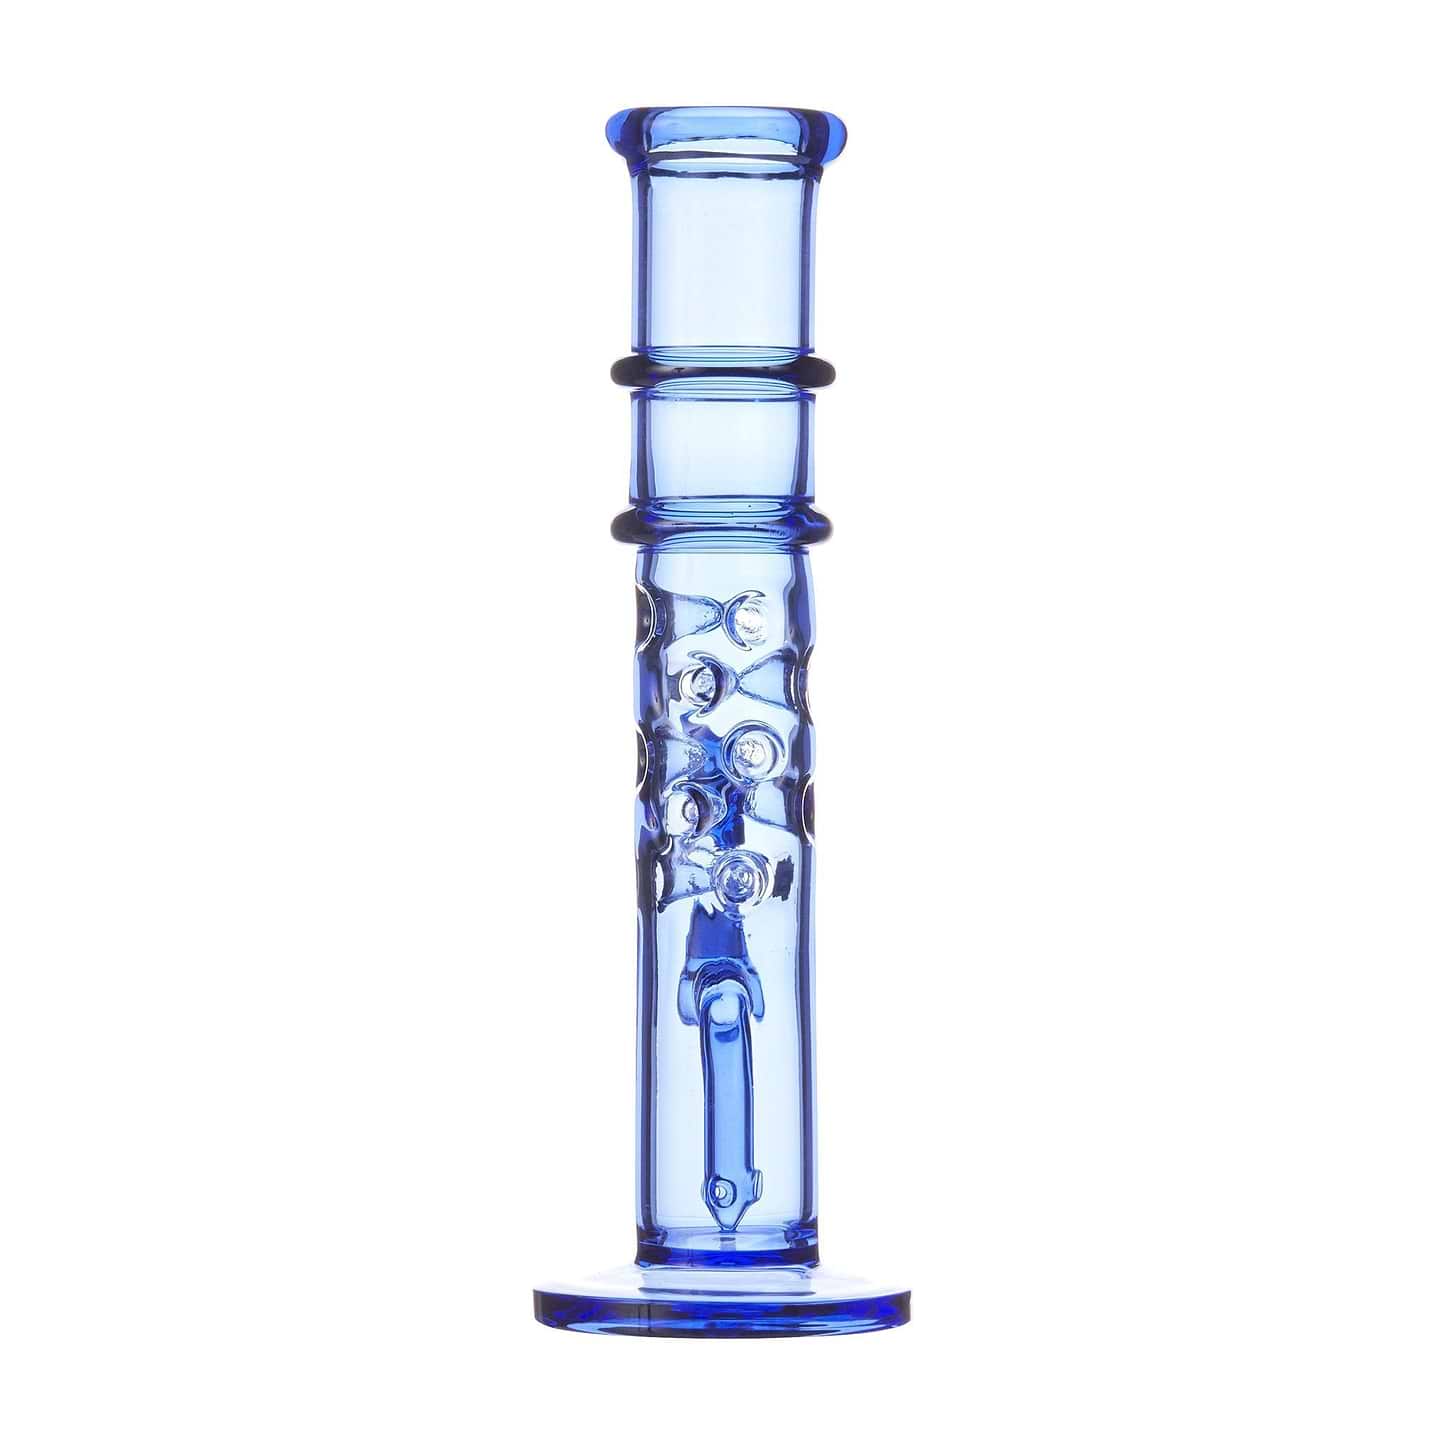 Sleek 11-inch straight-shooter glass bong with multilayered ice-catcher in elegant deep color